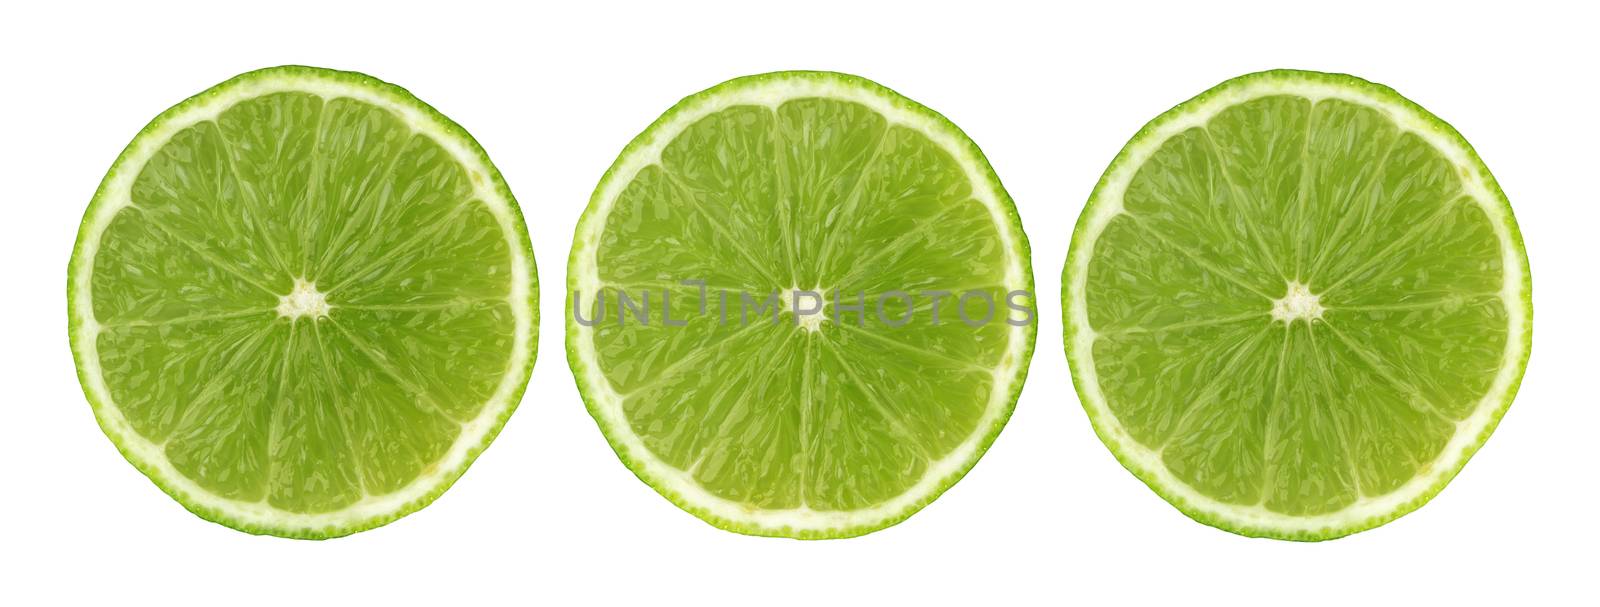 Lime slices isolated on white background with clipping path. Collection by xamtiw